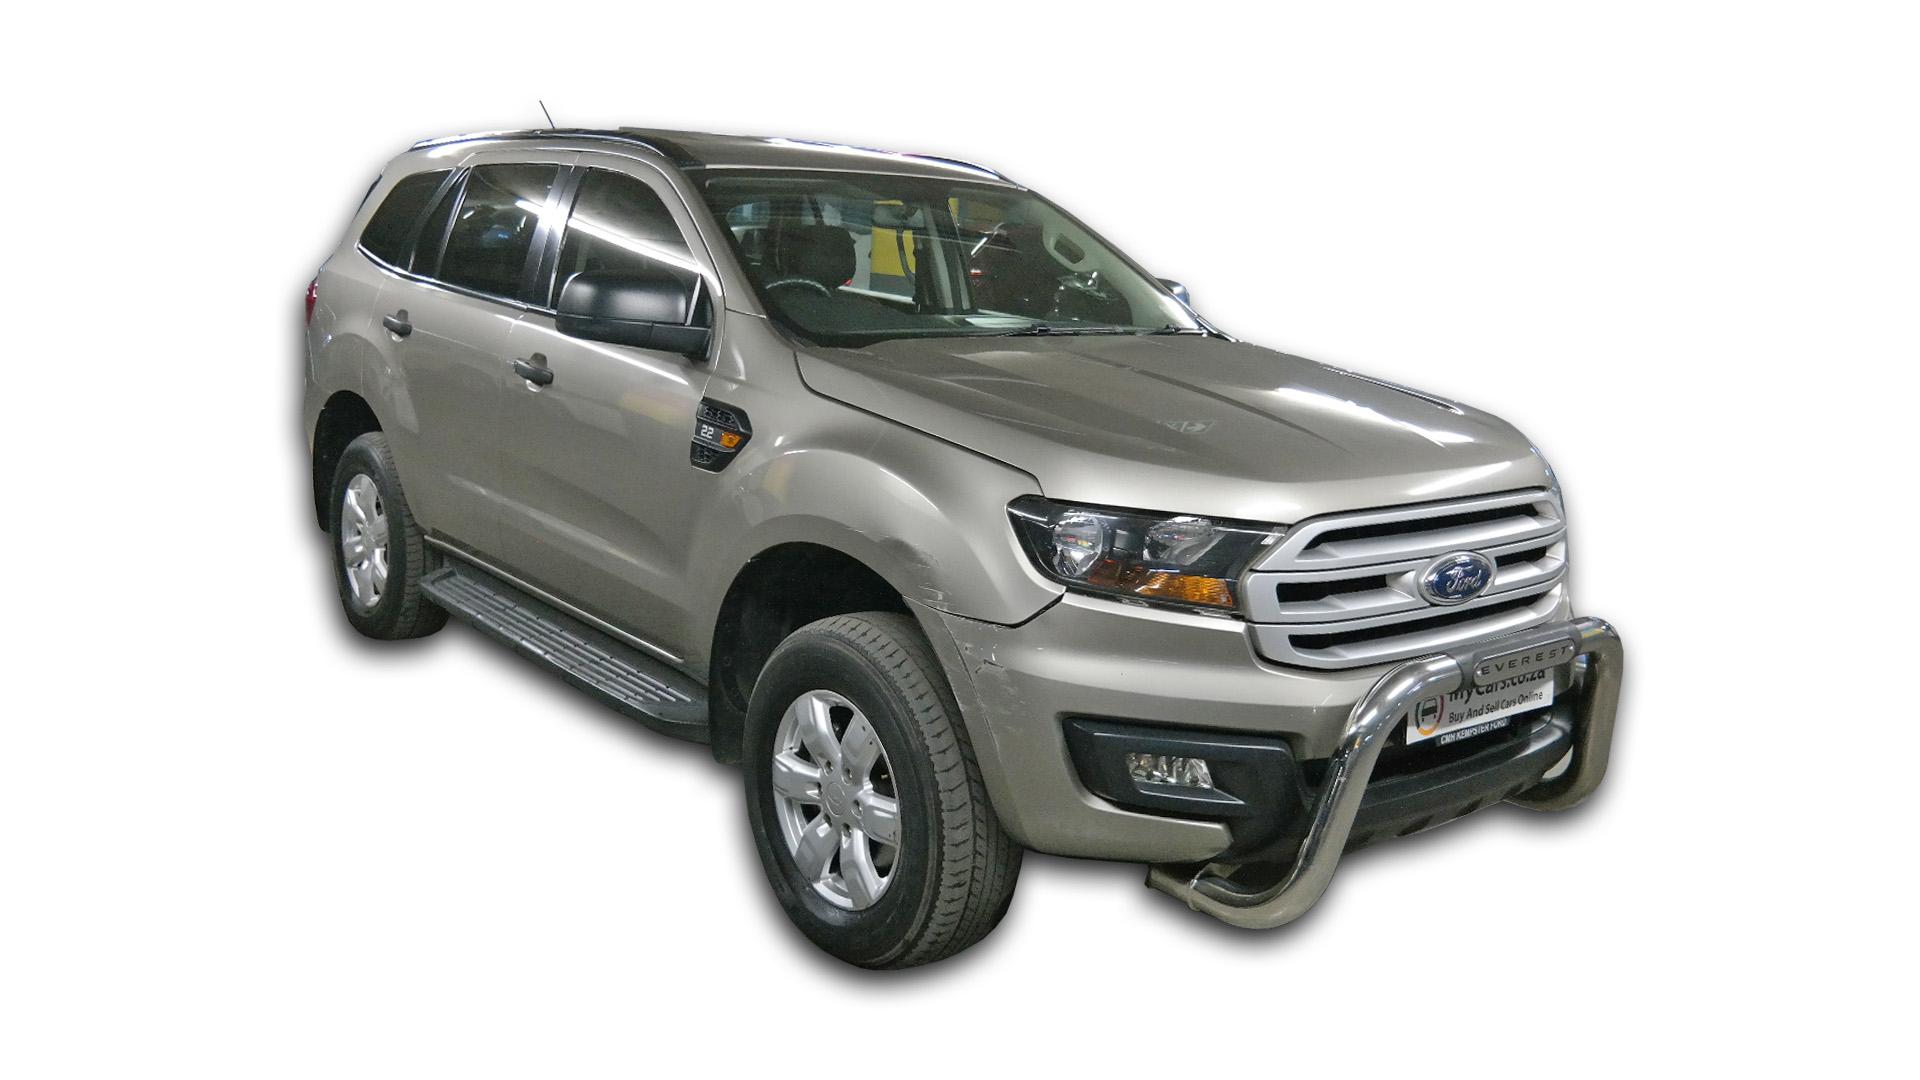 Ford Everest 2.2 Tdci XLS A/T